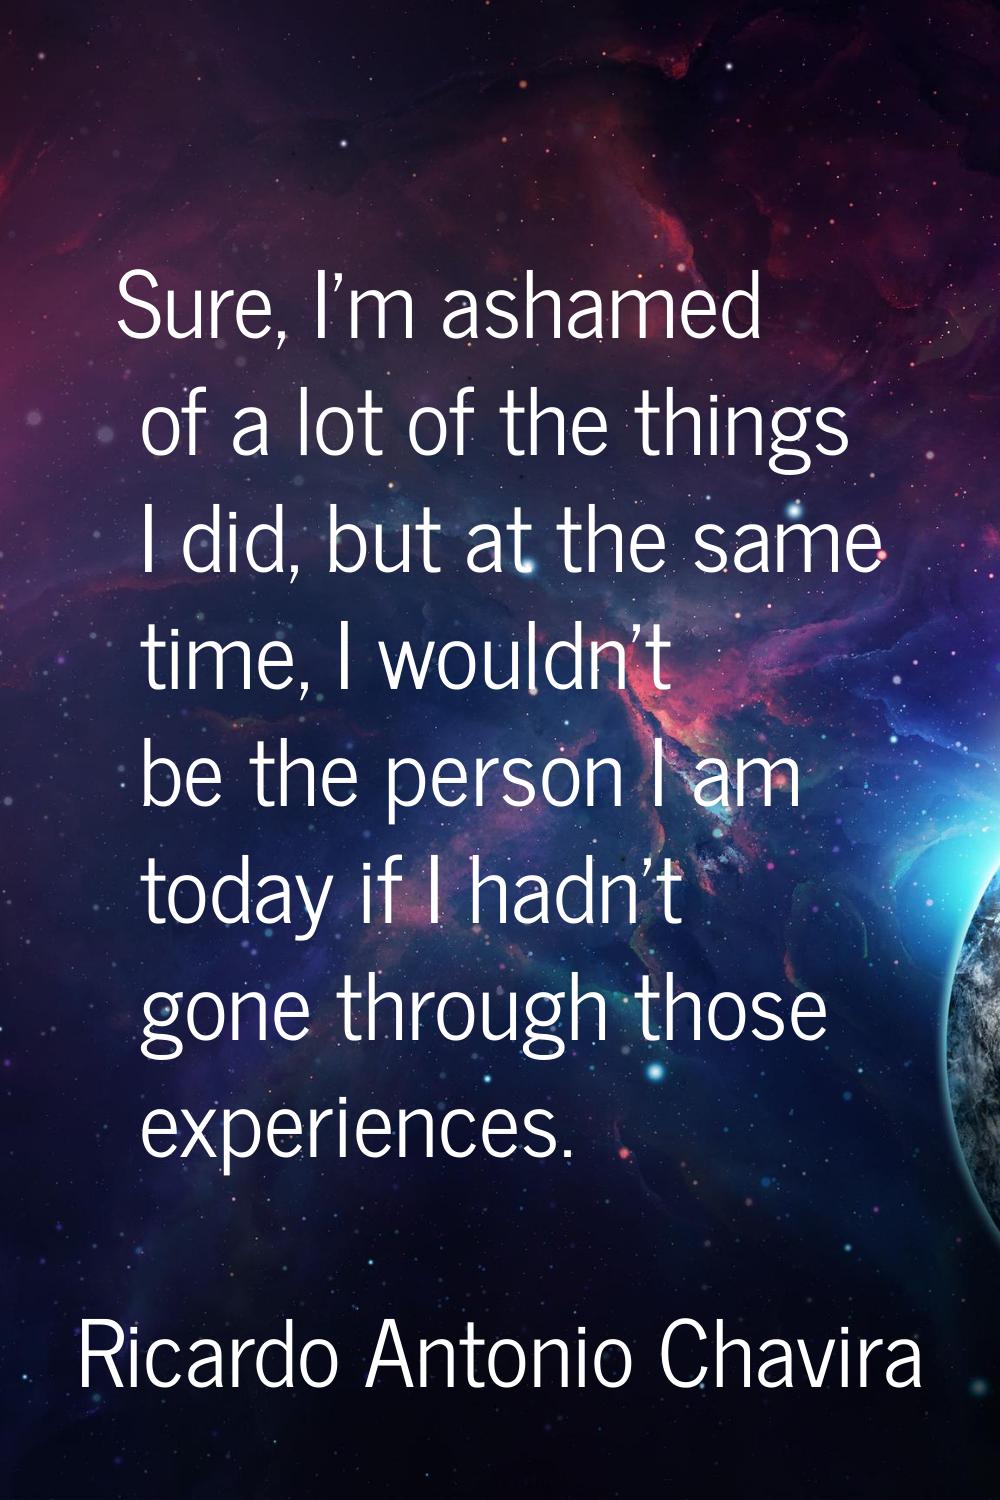 Sure, I'm ashamed of a lot of the things I did, but at the same time, I wouldn't be the person I am